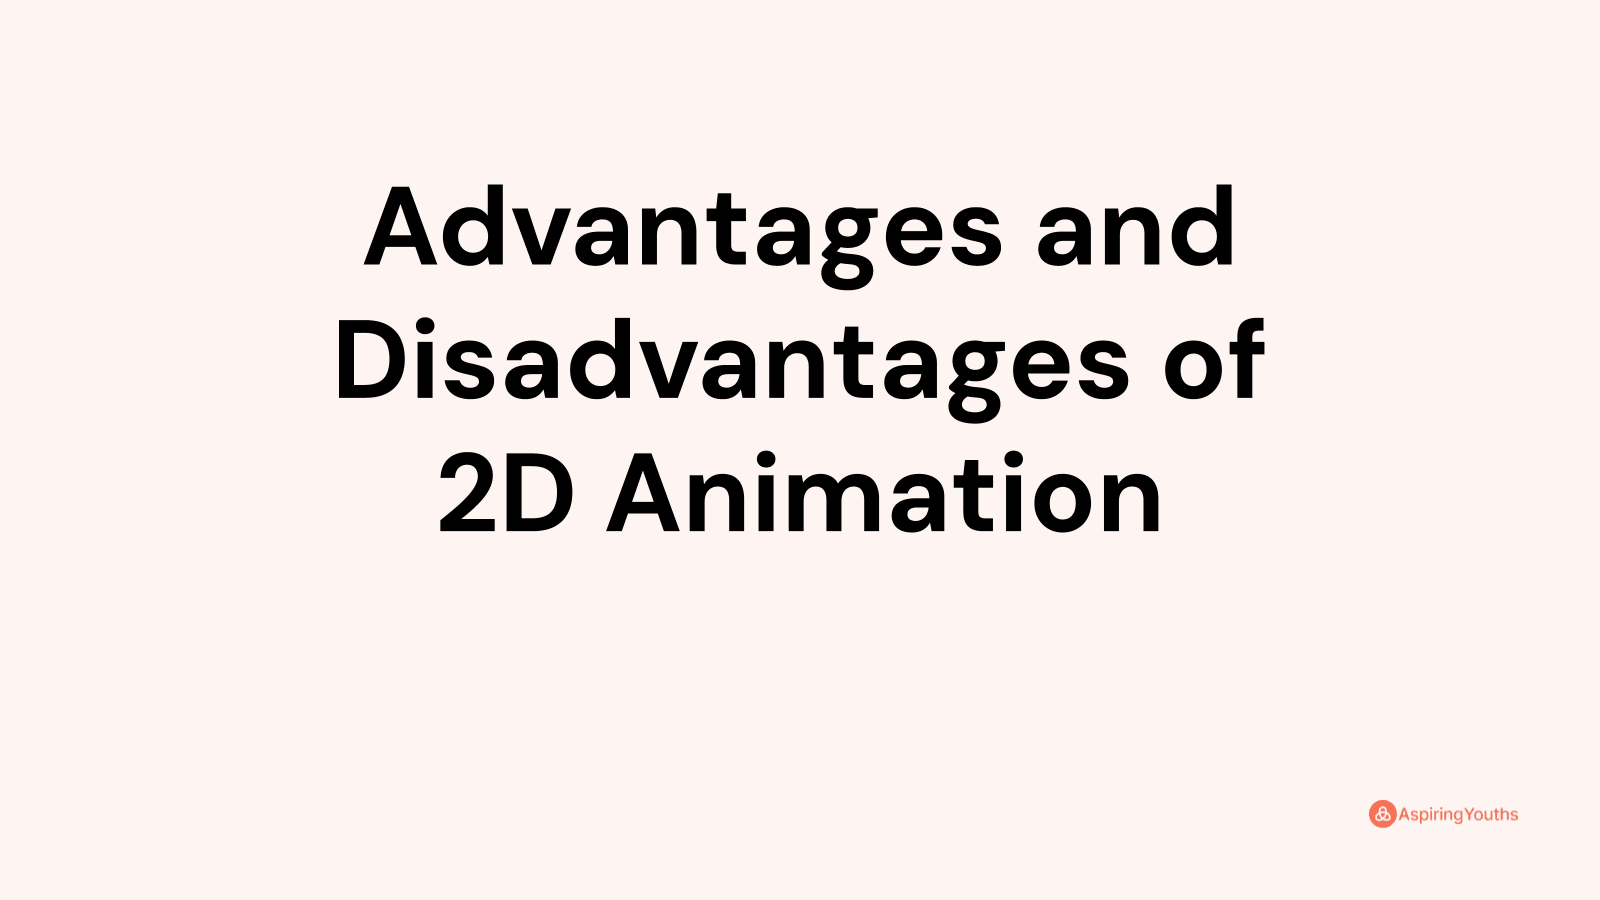 Advantages and disadvantages of 2D Animation